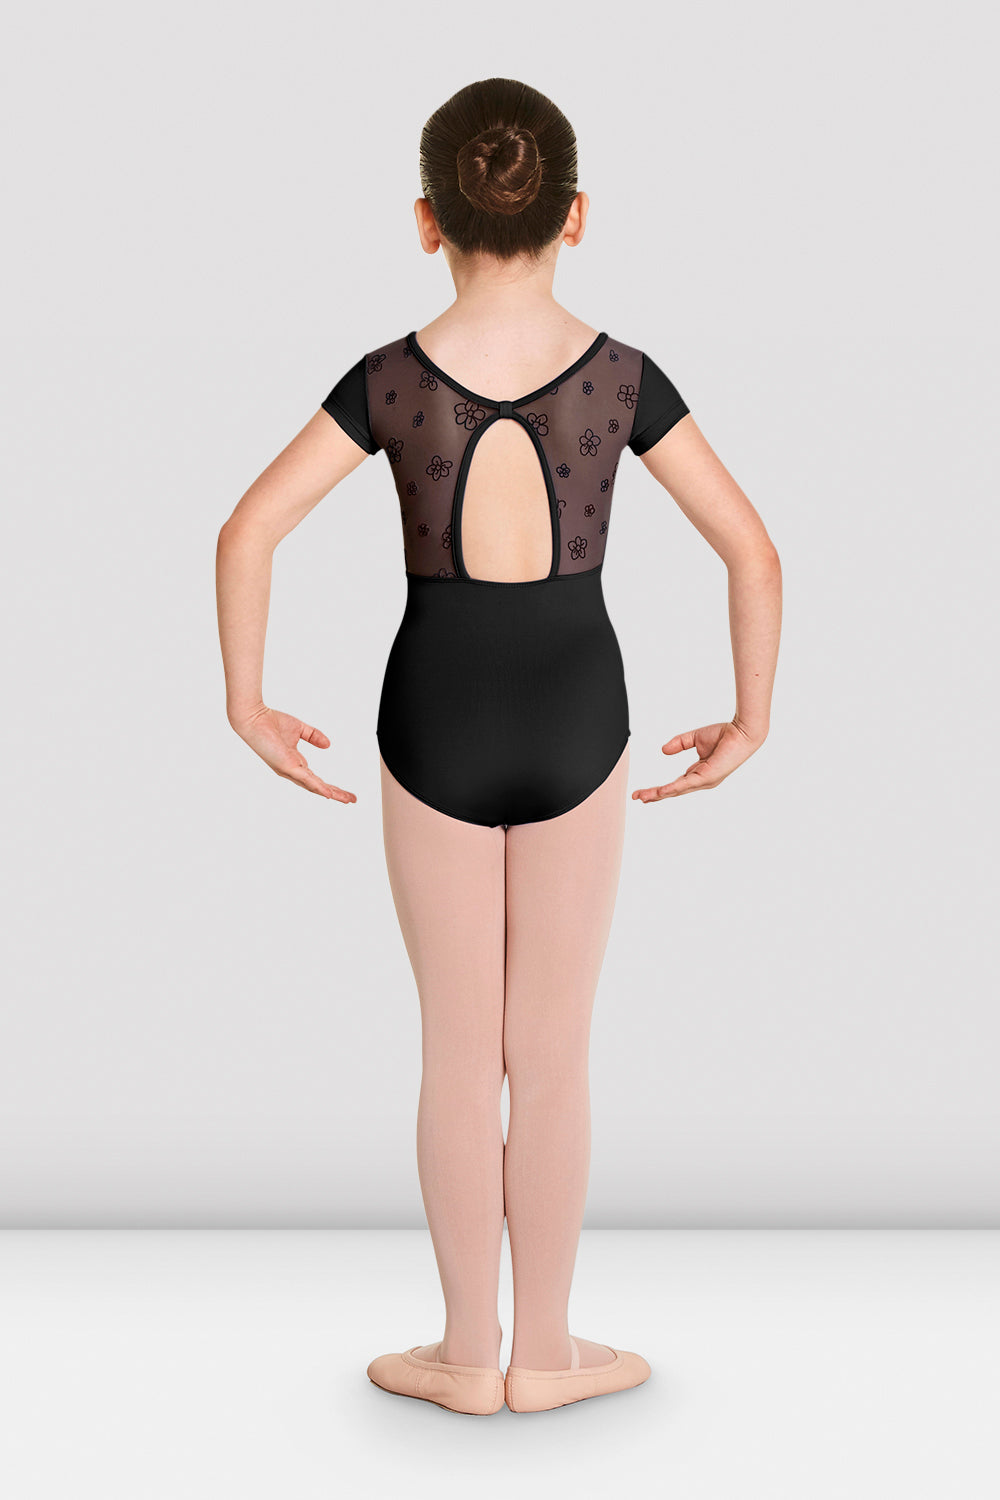 The back of a young female ballet dancer wearing the Girls Antheia short sleeve sweetheart leotard